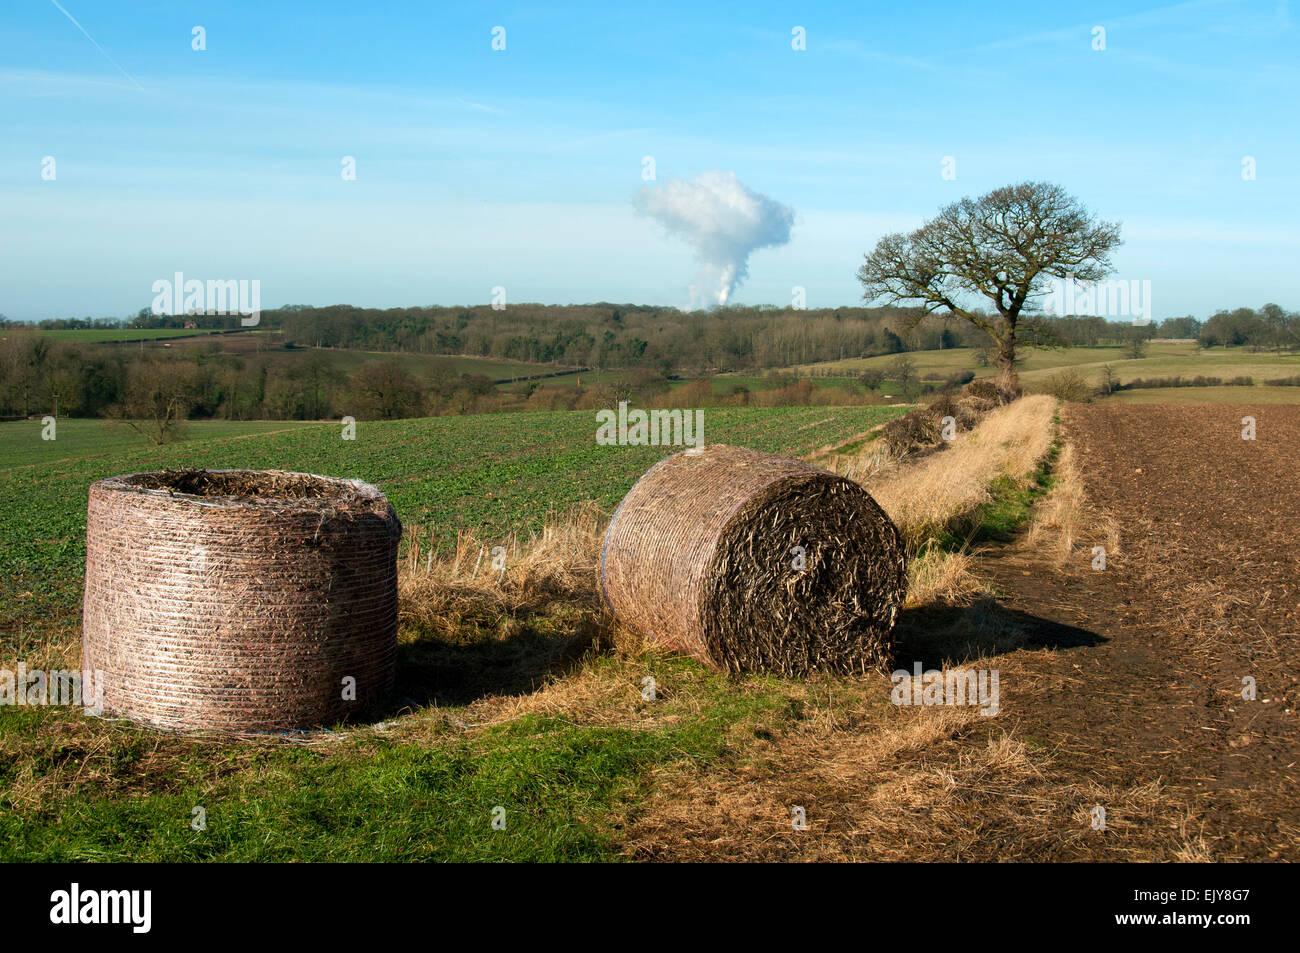 Hay bales in a field, Nottinghamshire, UK.  In the distance is steam rising from the Ratcliffe-on-Soar power station. Stock Photo